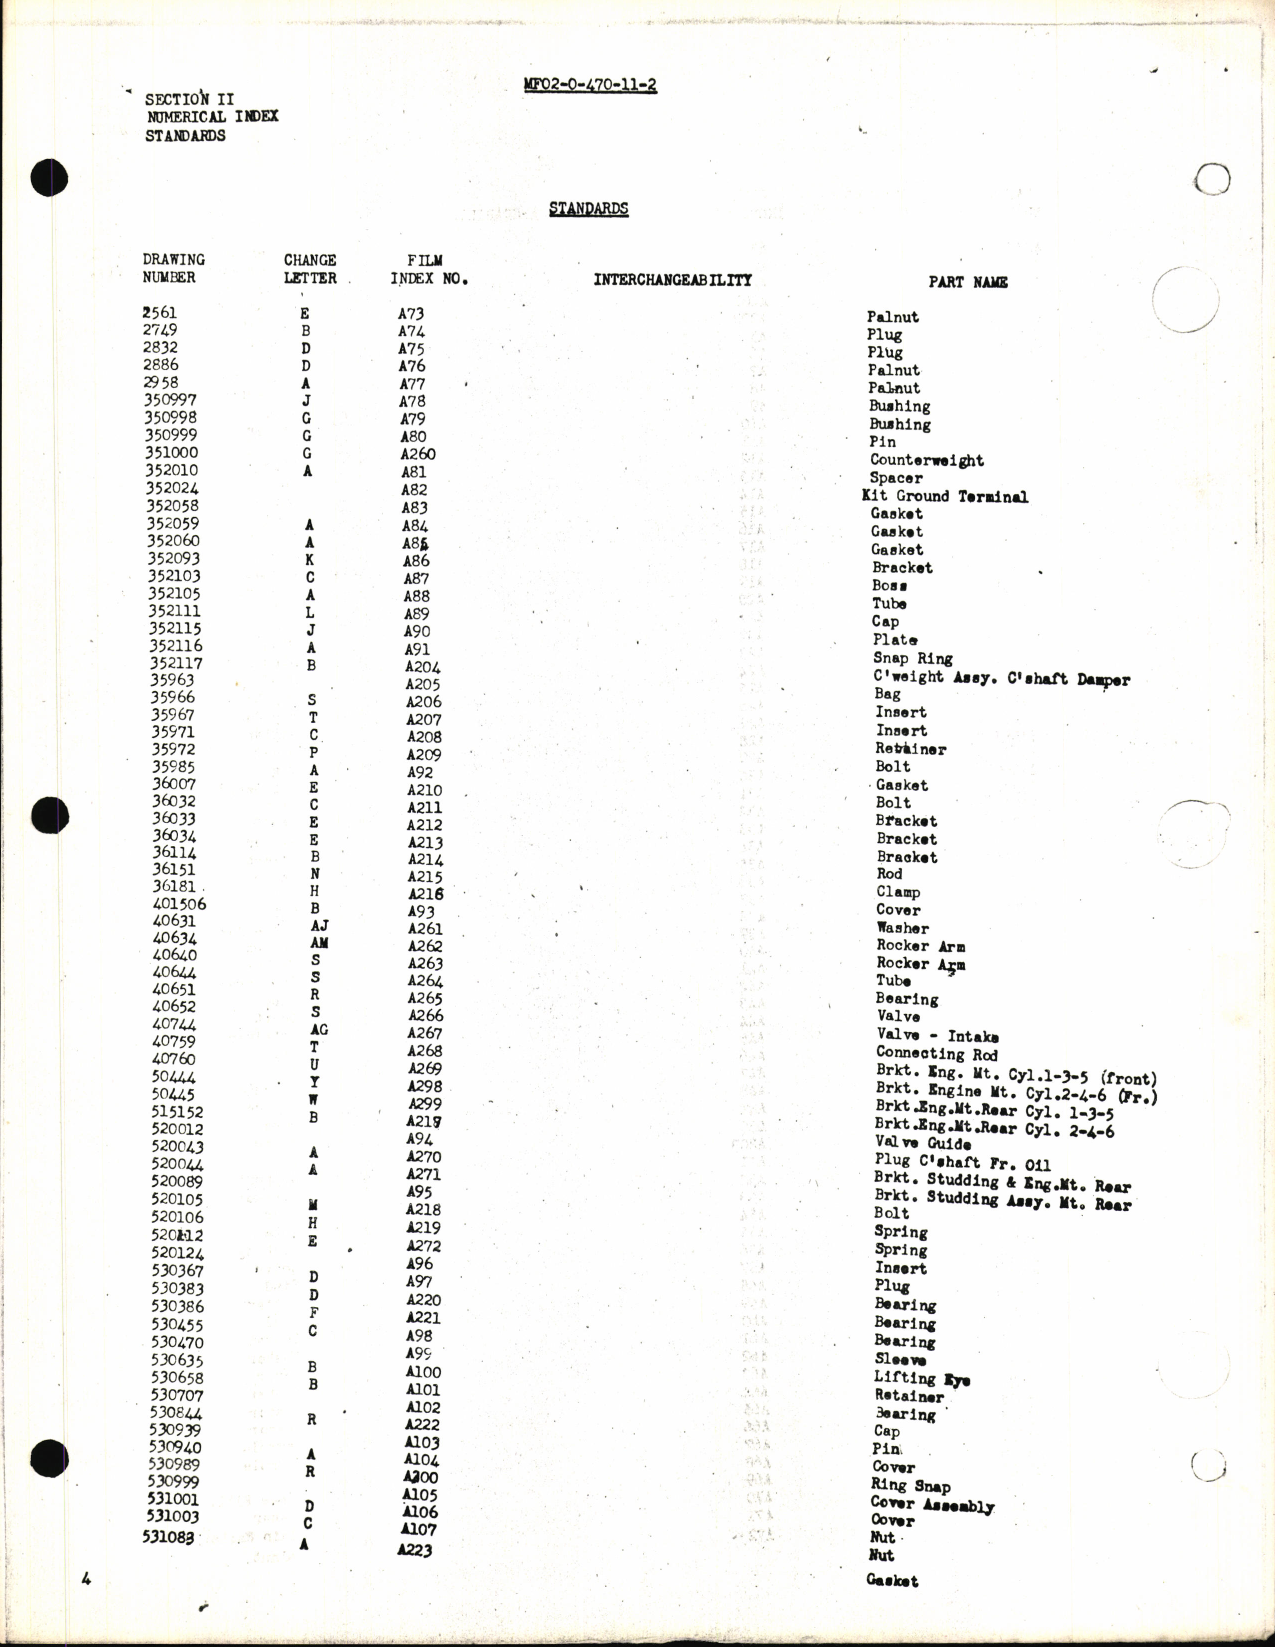 Sample page 6 from AirCorps Library document: Index of Drawings on Microfilm 0-470-11 Series Engines